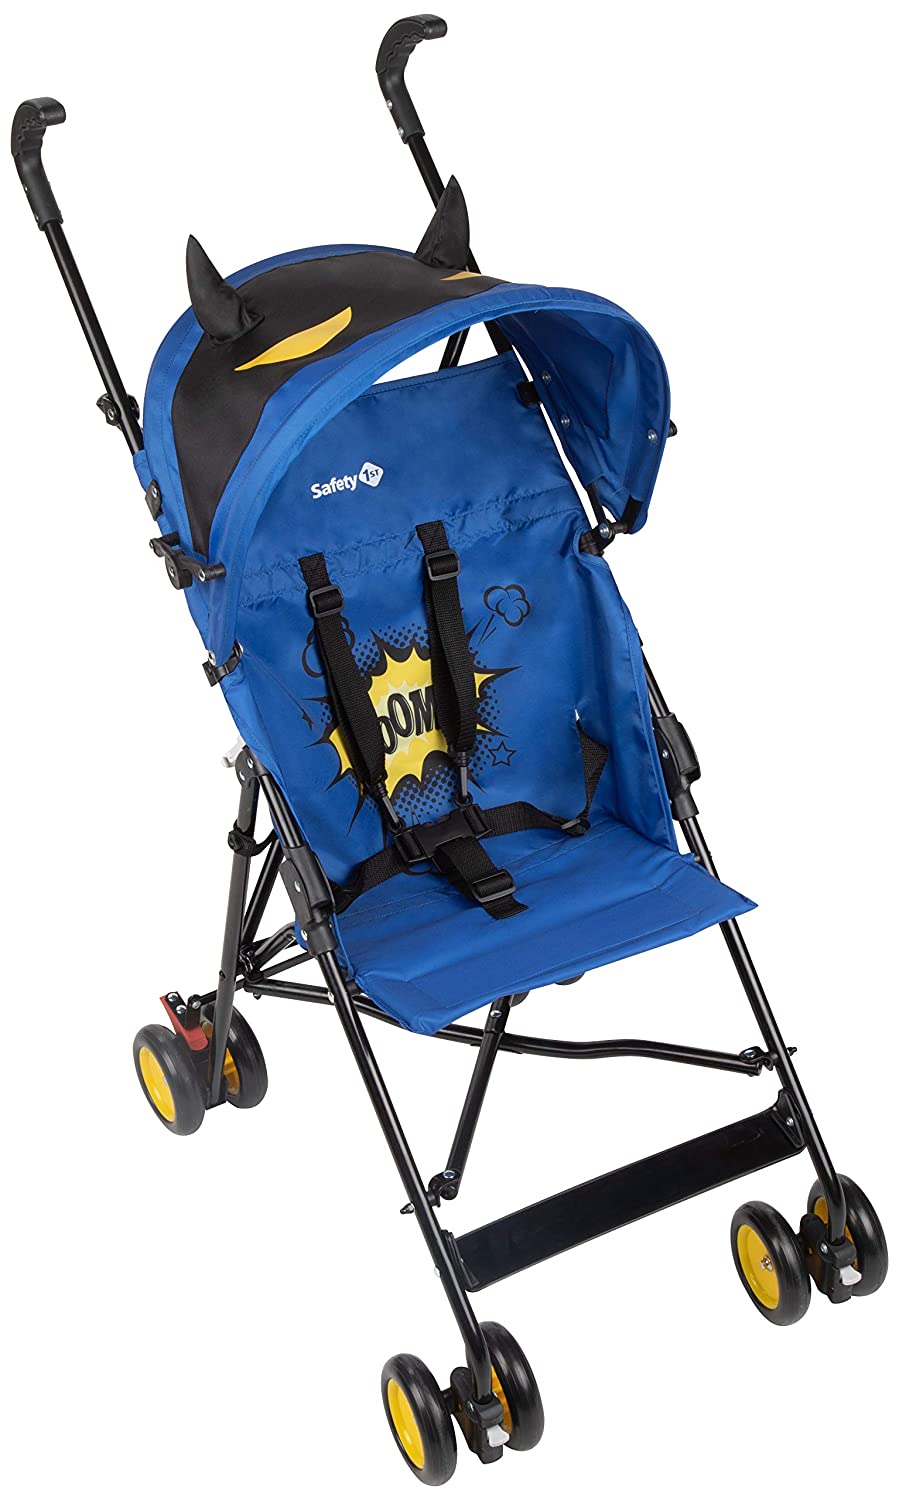 Safety 1st Buggy, Crazy Peps with Funny Sun Canopy, Compact and Manoeuvrable Pushchair, Ideal for On the Go, Can be Used from Approx. 6 Months - Up to Max. 15 kg, Super Blue (Blue)